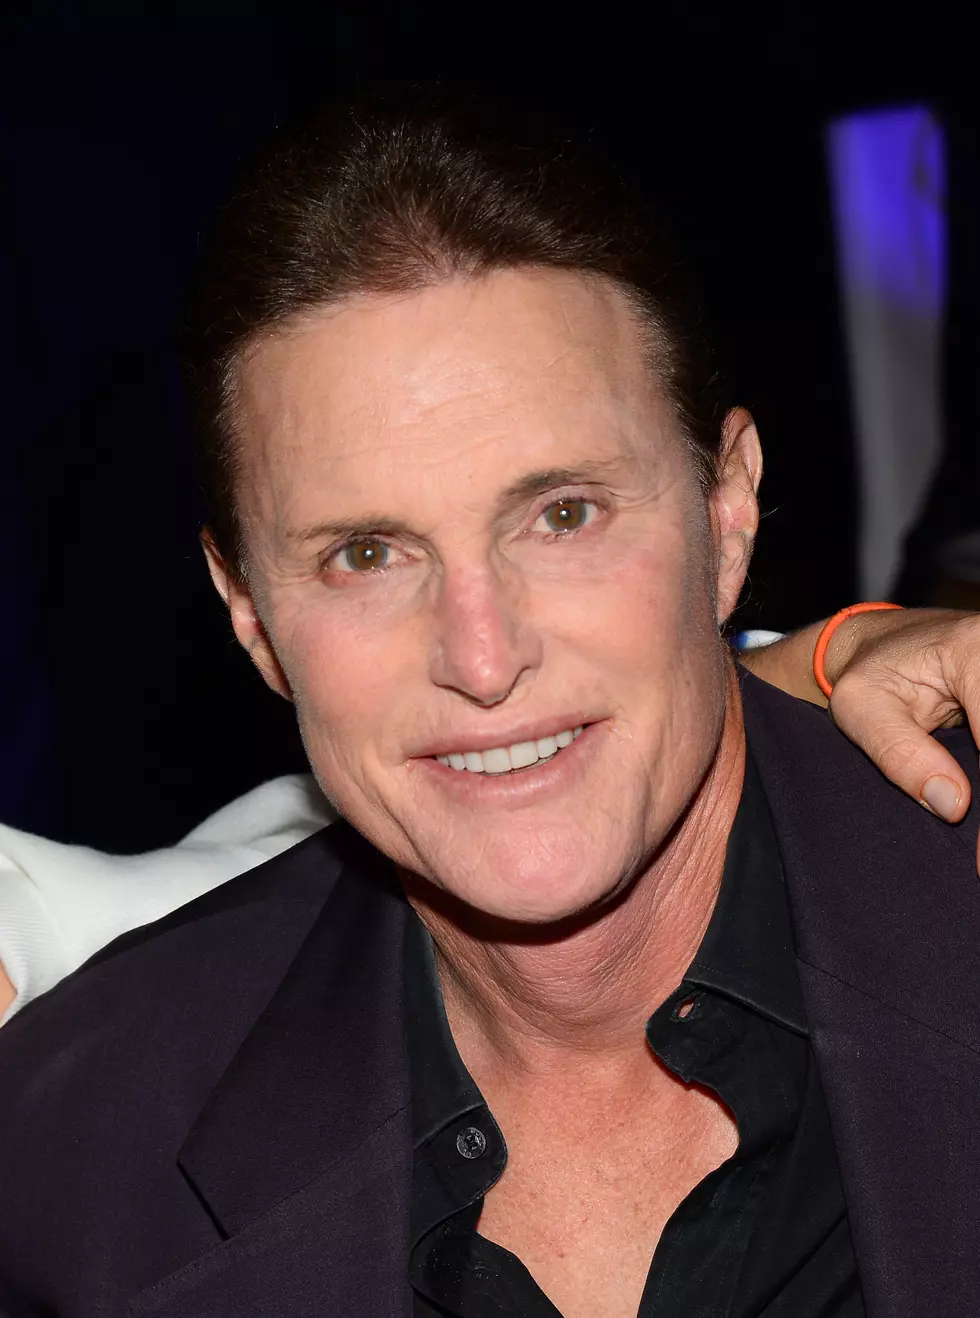 Now that Bruce Jenner is Wearing a Bra, Does That Prove He&#8217;s Becoming a Woman? [POLL]